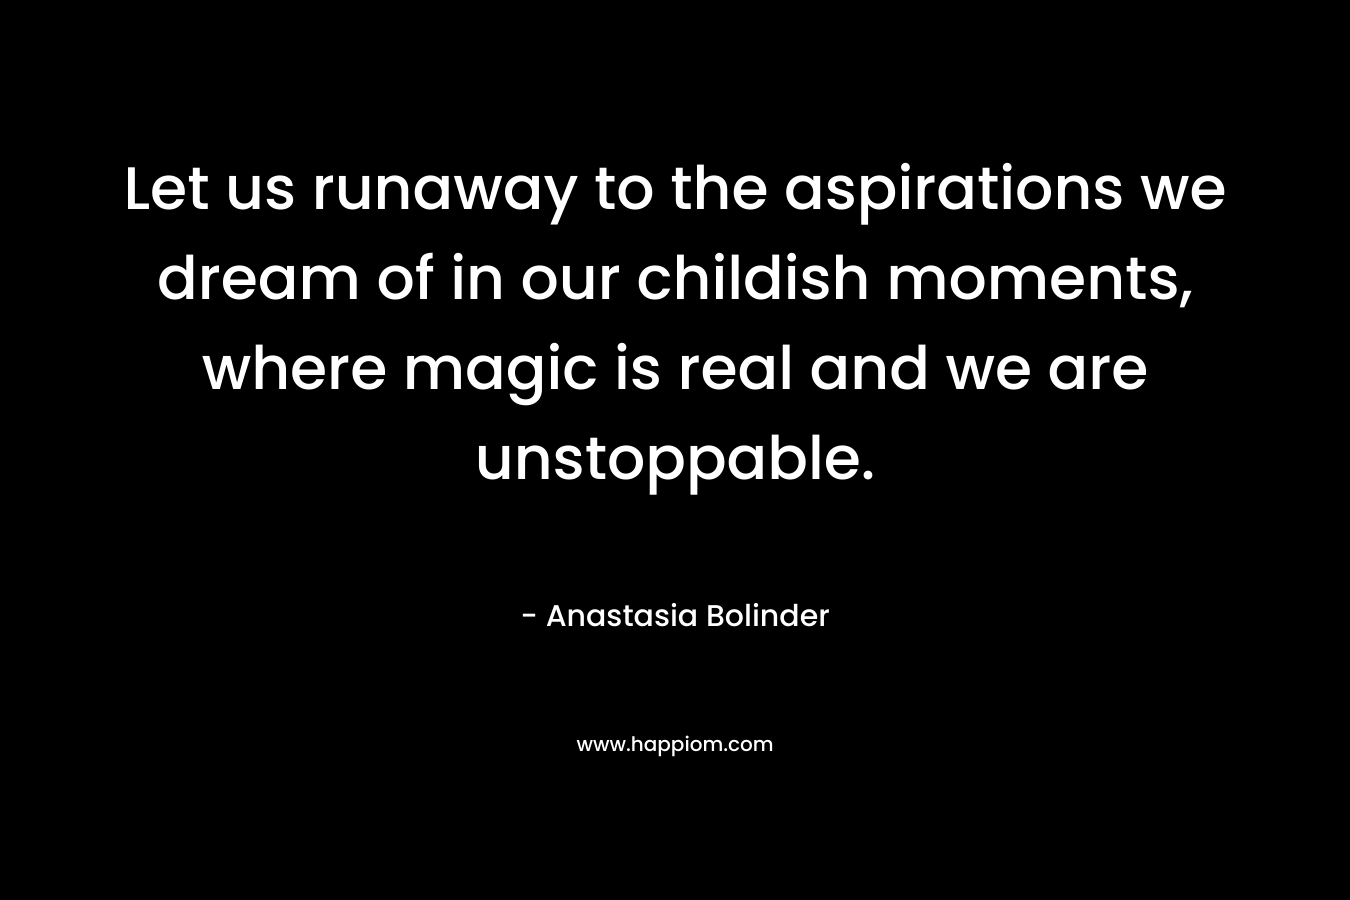 Let us runaway to the aspirations we dream of in our childish moments, where magic is real and we are unstoppable. – Anastasia Bolinder